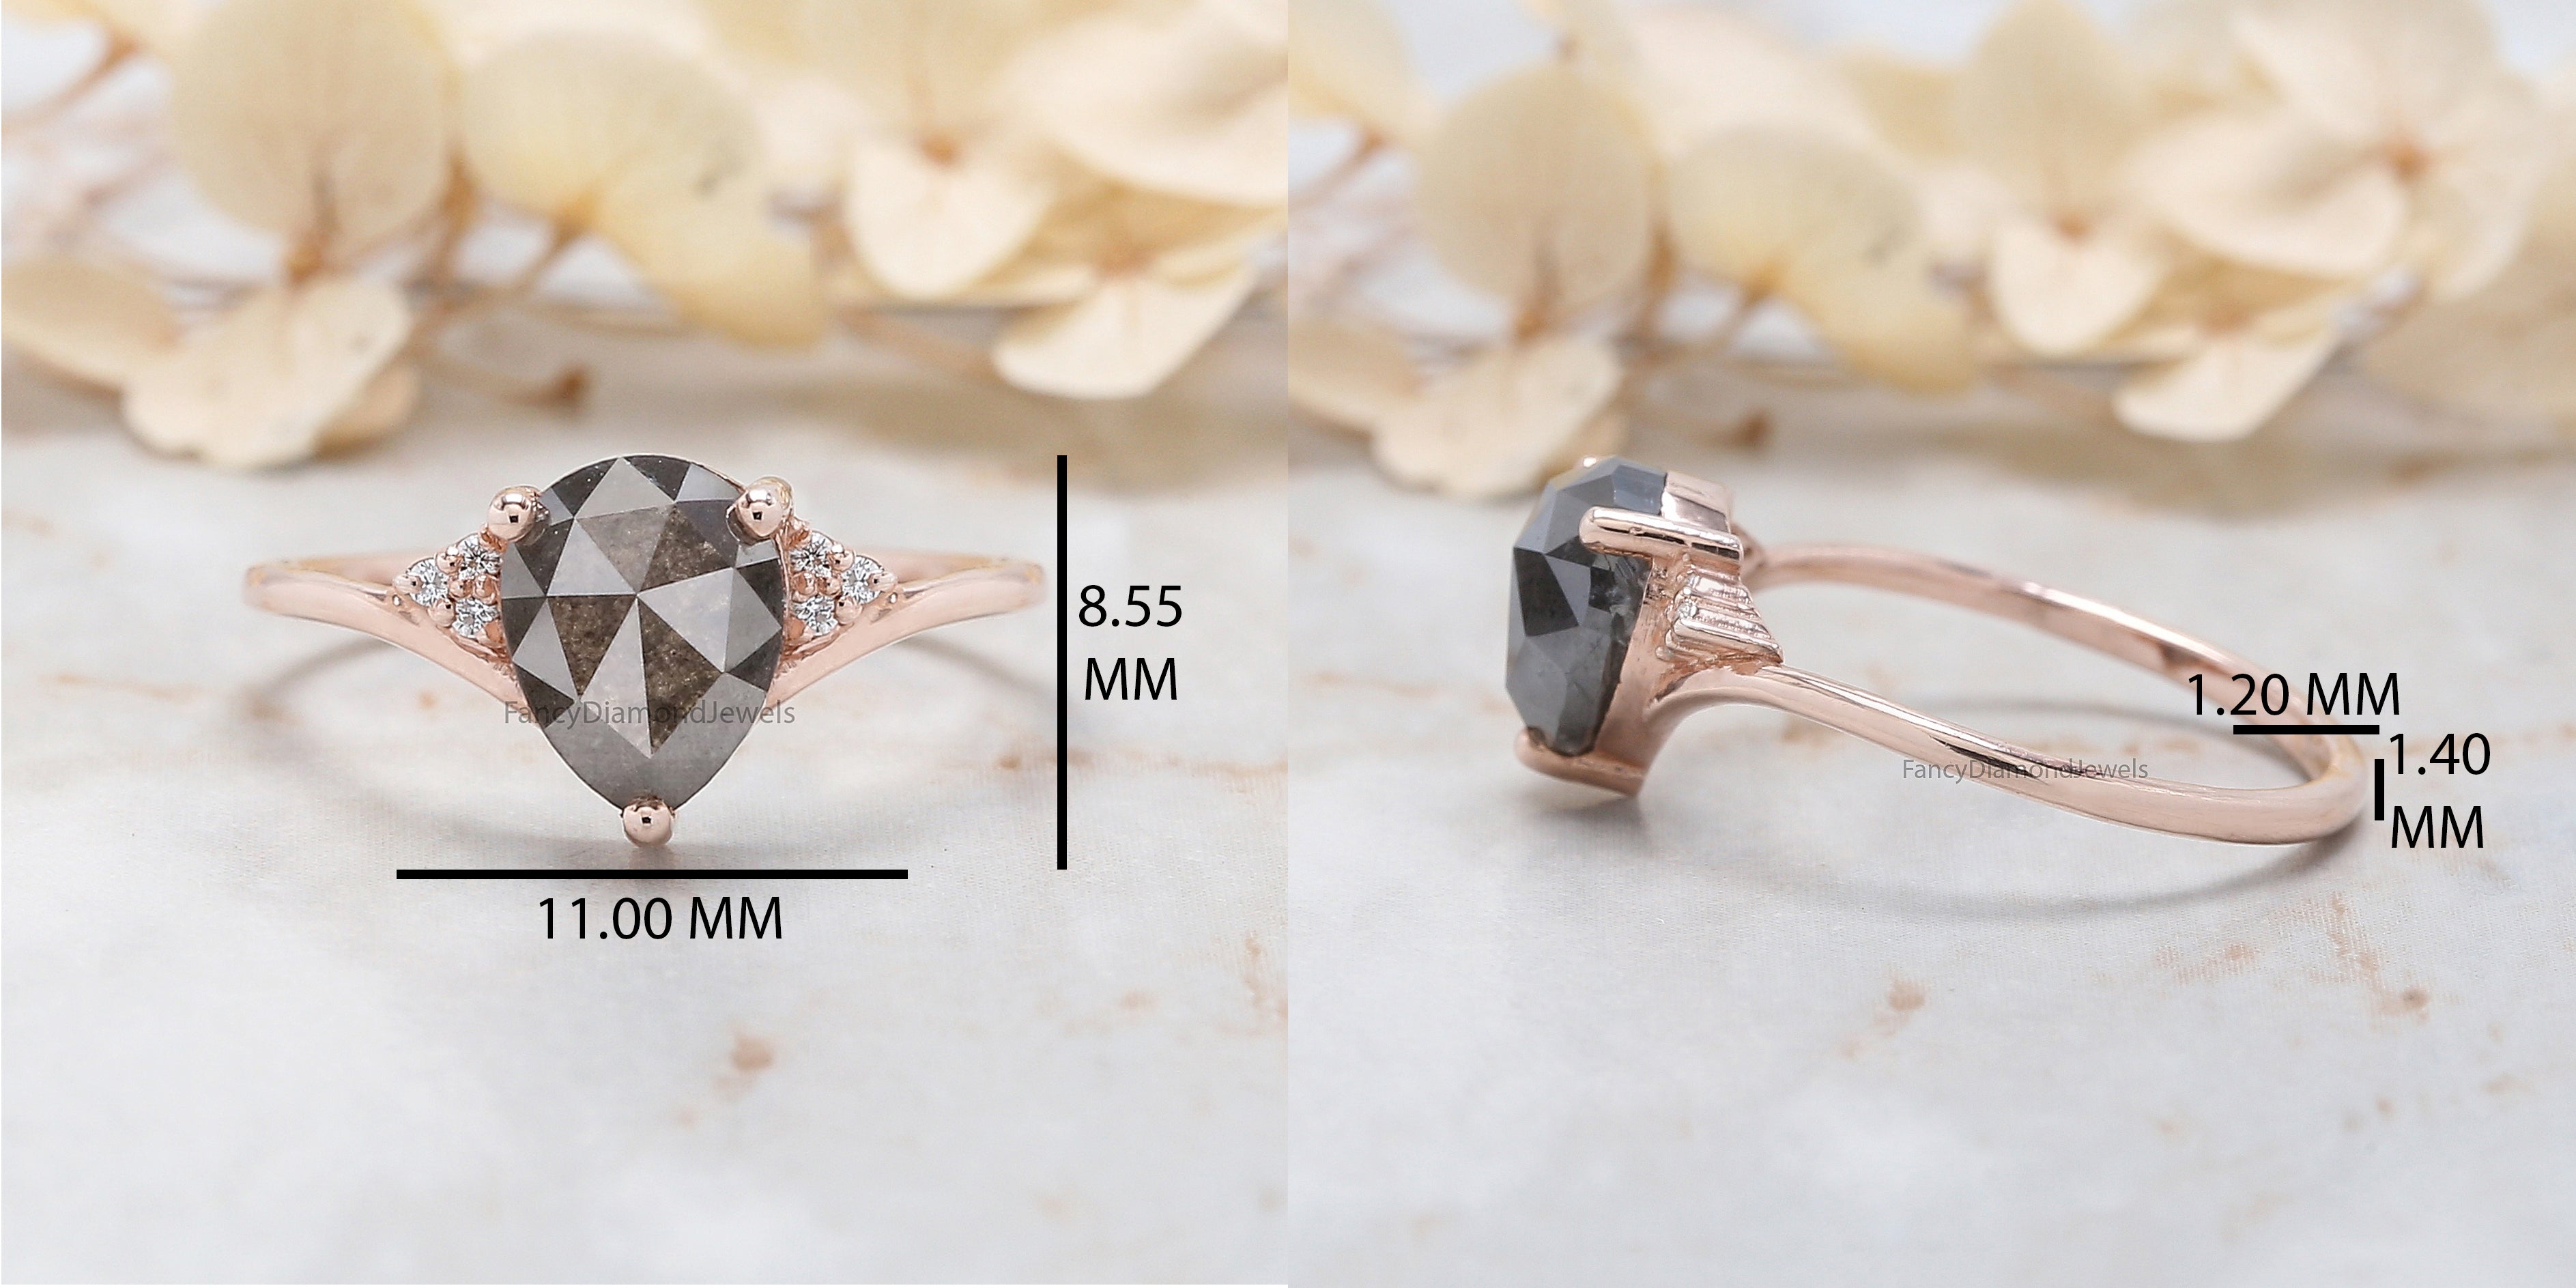 Pear Cut Salt And Pepper Diamond Ring 1.53 Ct 7.90 MM Pear Diamond Ring 14K Solid Rose Gold Silver Pear Engagement Ring Gift For Her QL8270